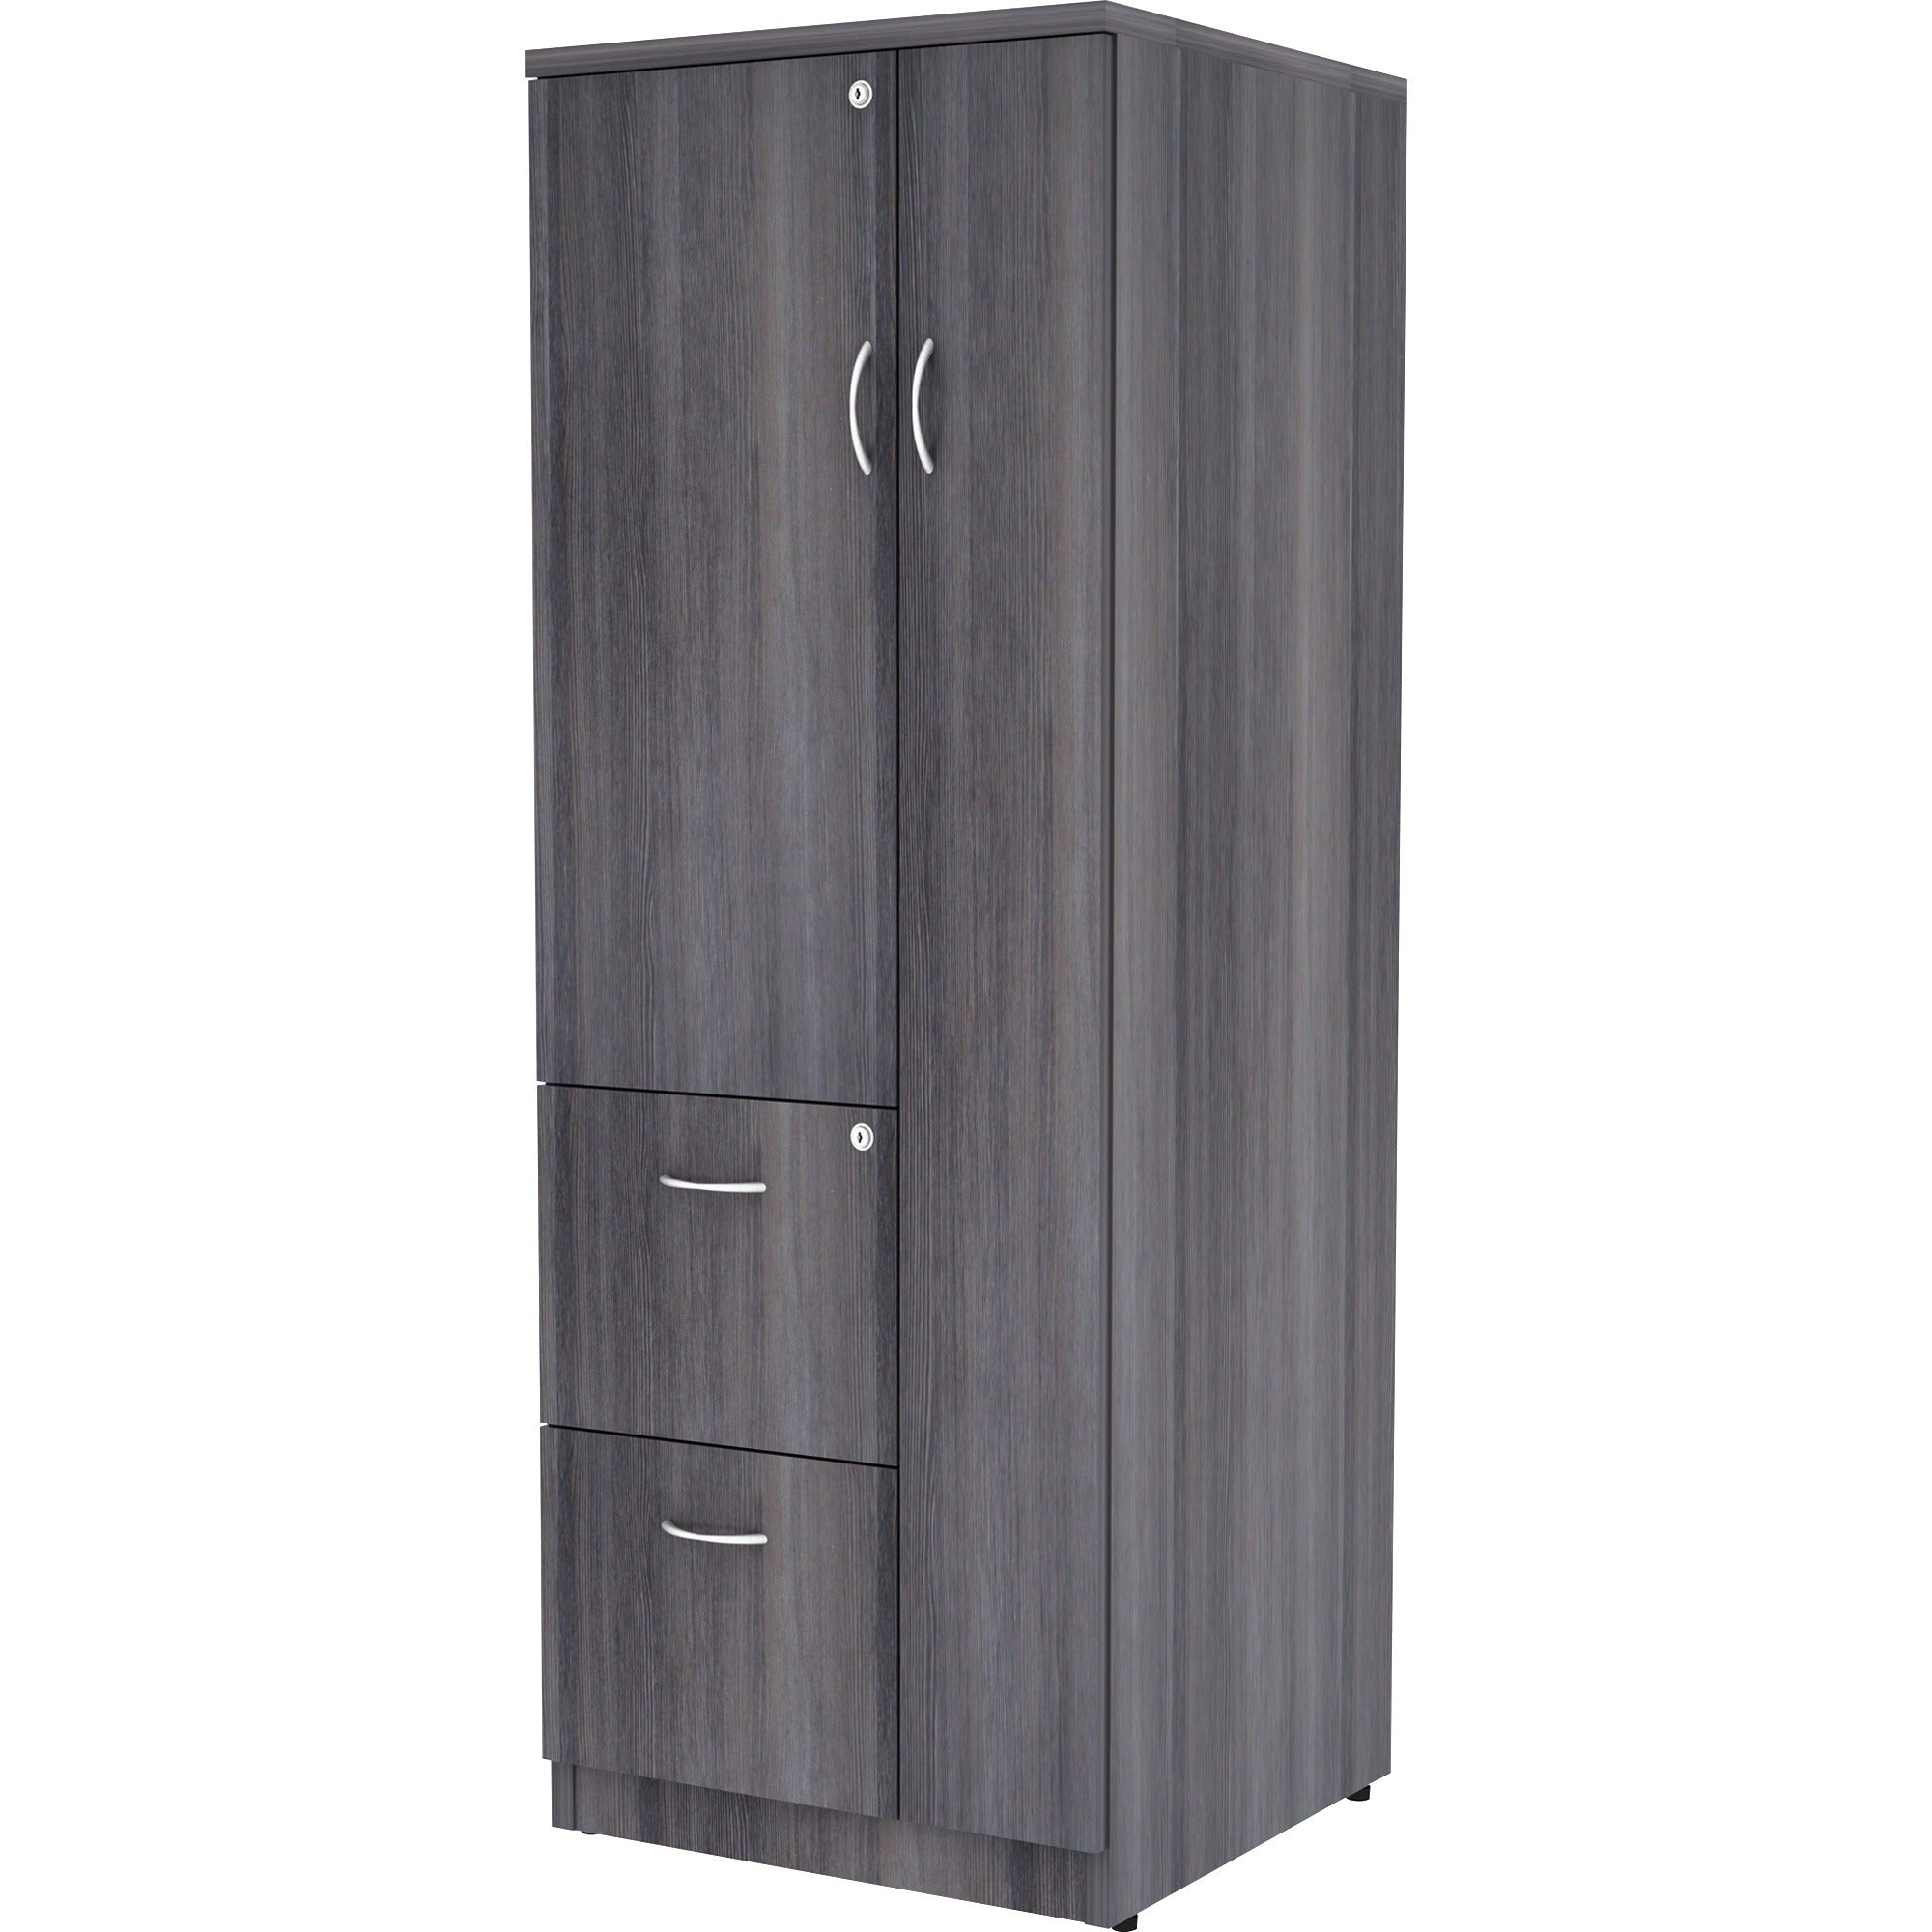 lorell-essentials-revelance-tall-storage-cabinet-236-x-236656-2-drawers-2-shelves-material-medium-density-fiberboard-mdf-particleboard-finish-weathered-charcoal-abrasion-resistant_llr69659 - 3